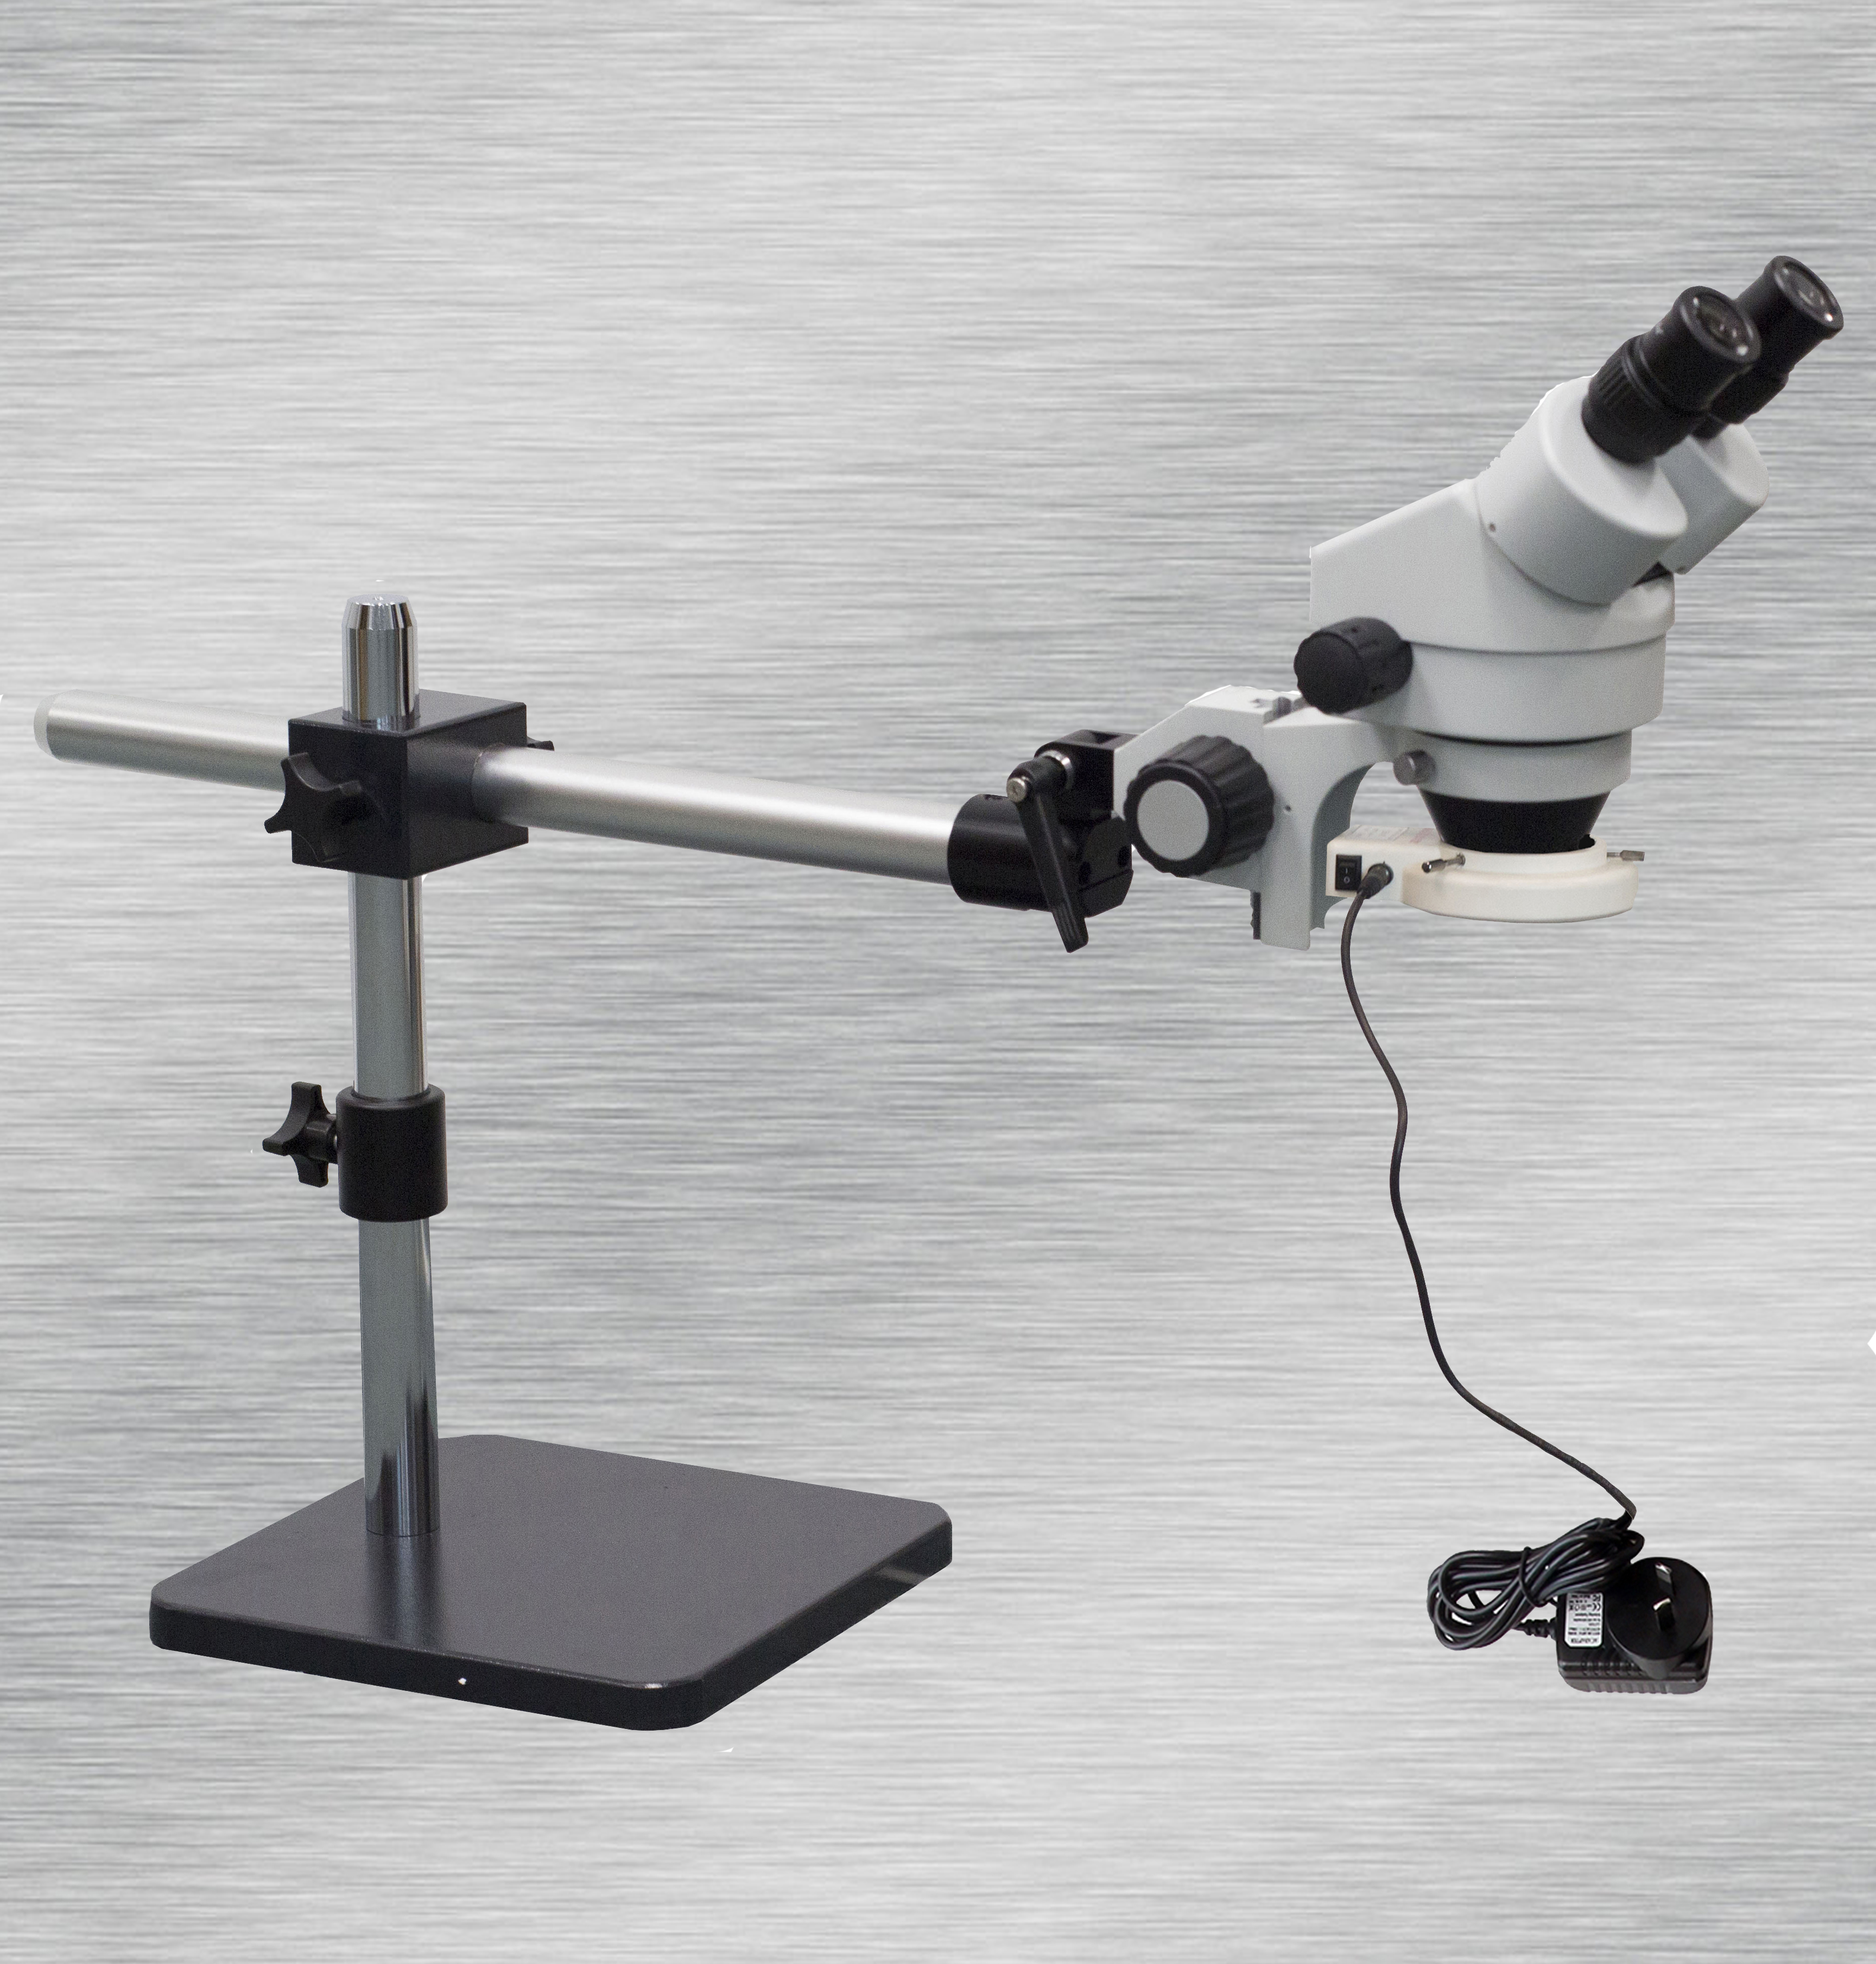 Biosecurity Inspection Microscopes